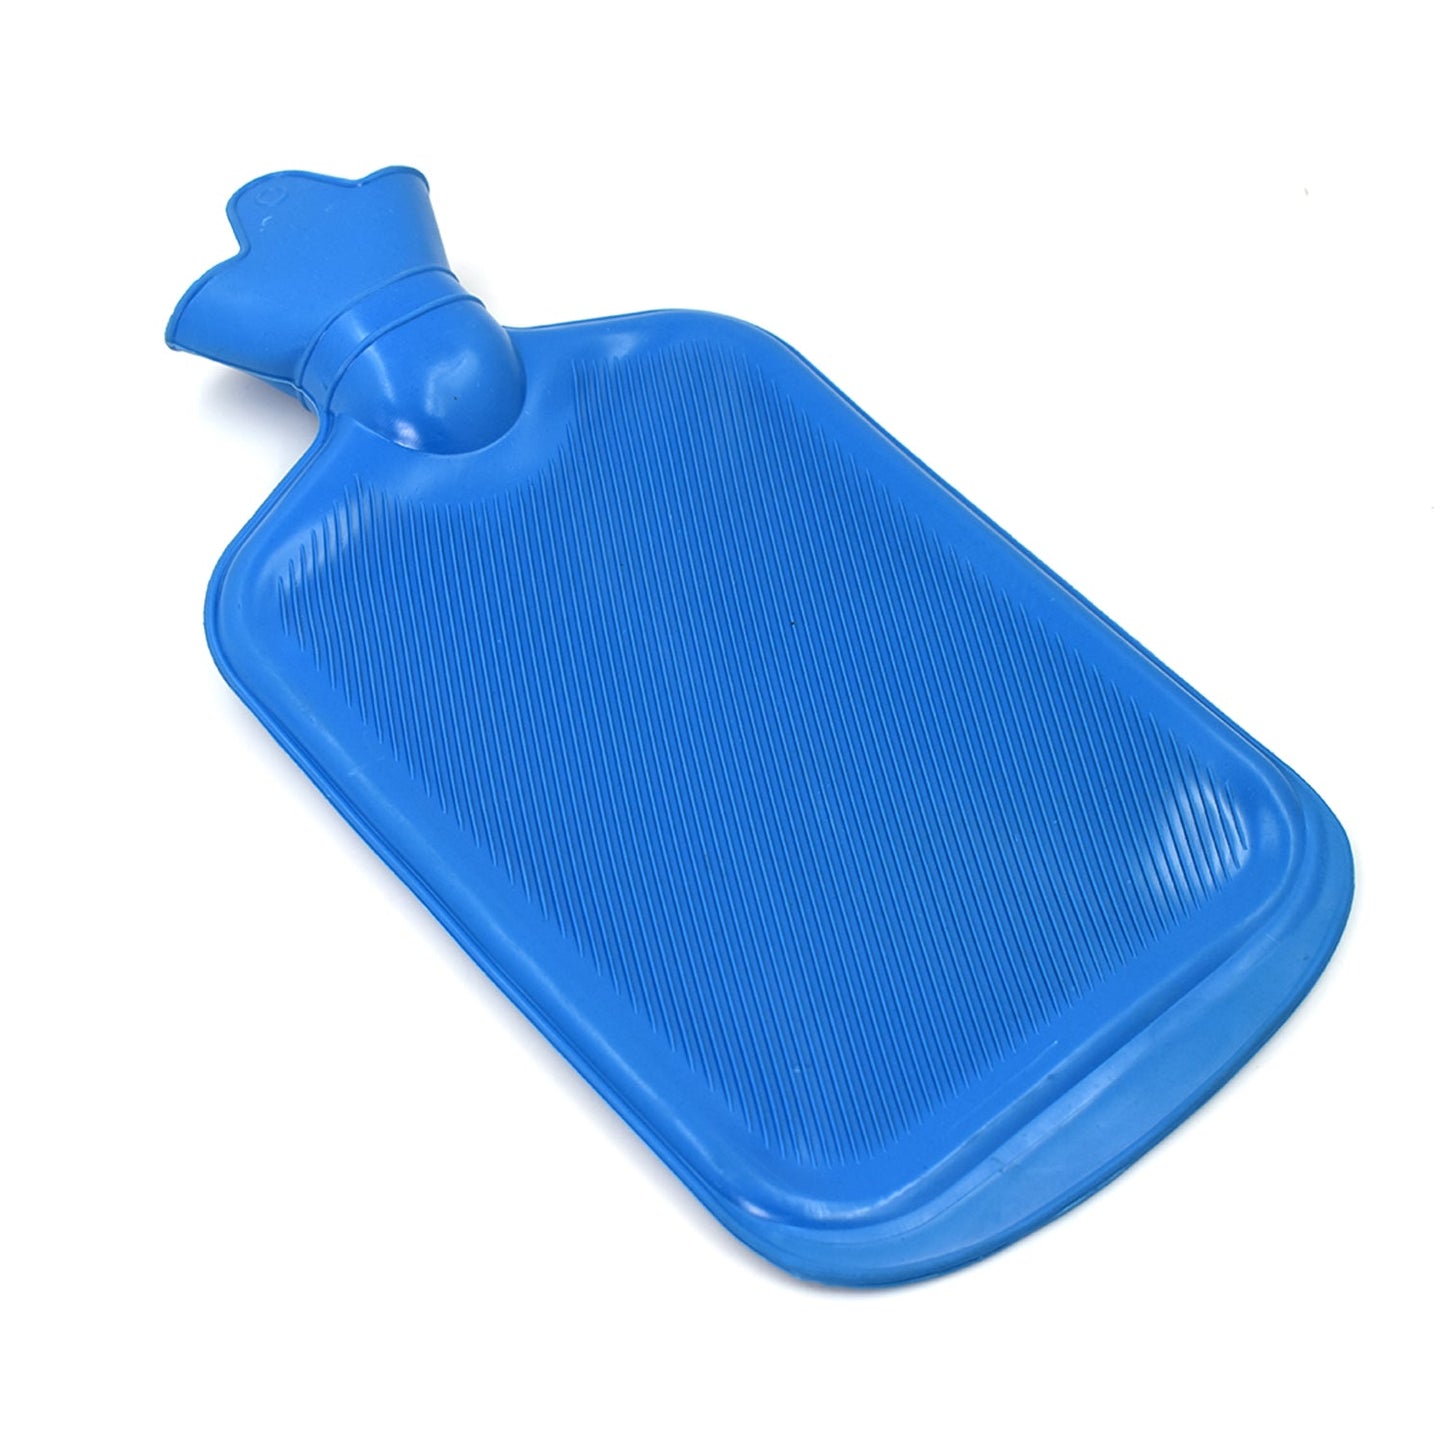 1454 Hot water Bag 2000 ML used in all kinds of household and medical purposes as a pain relief from muscle and neural problems. 